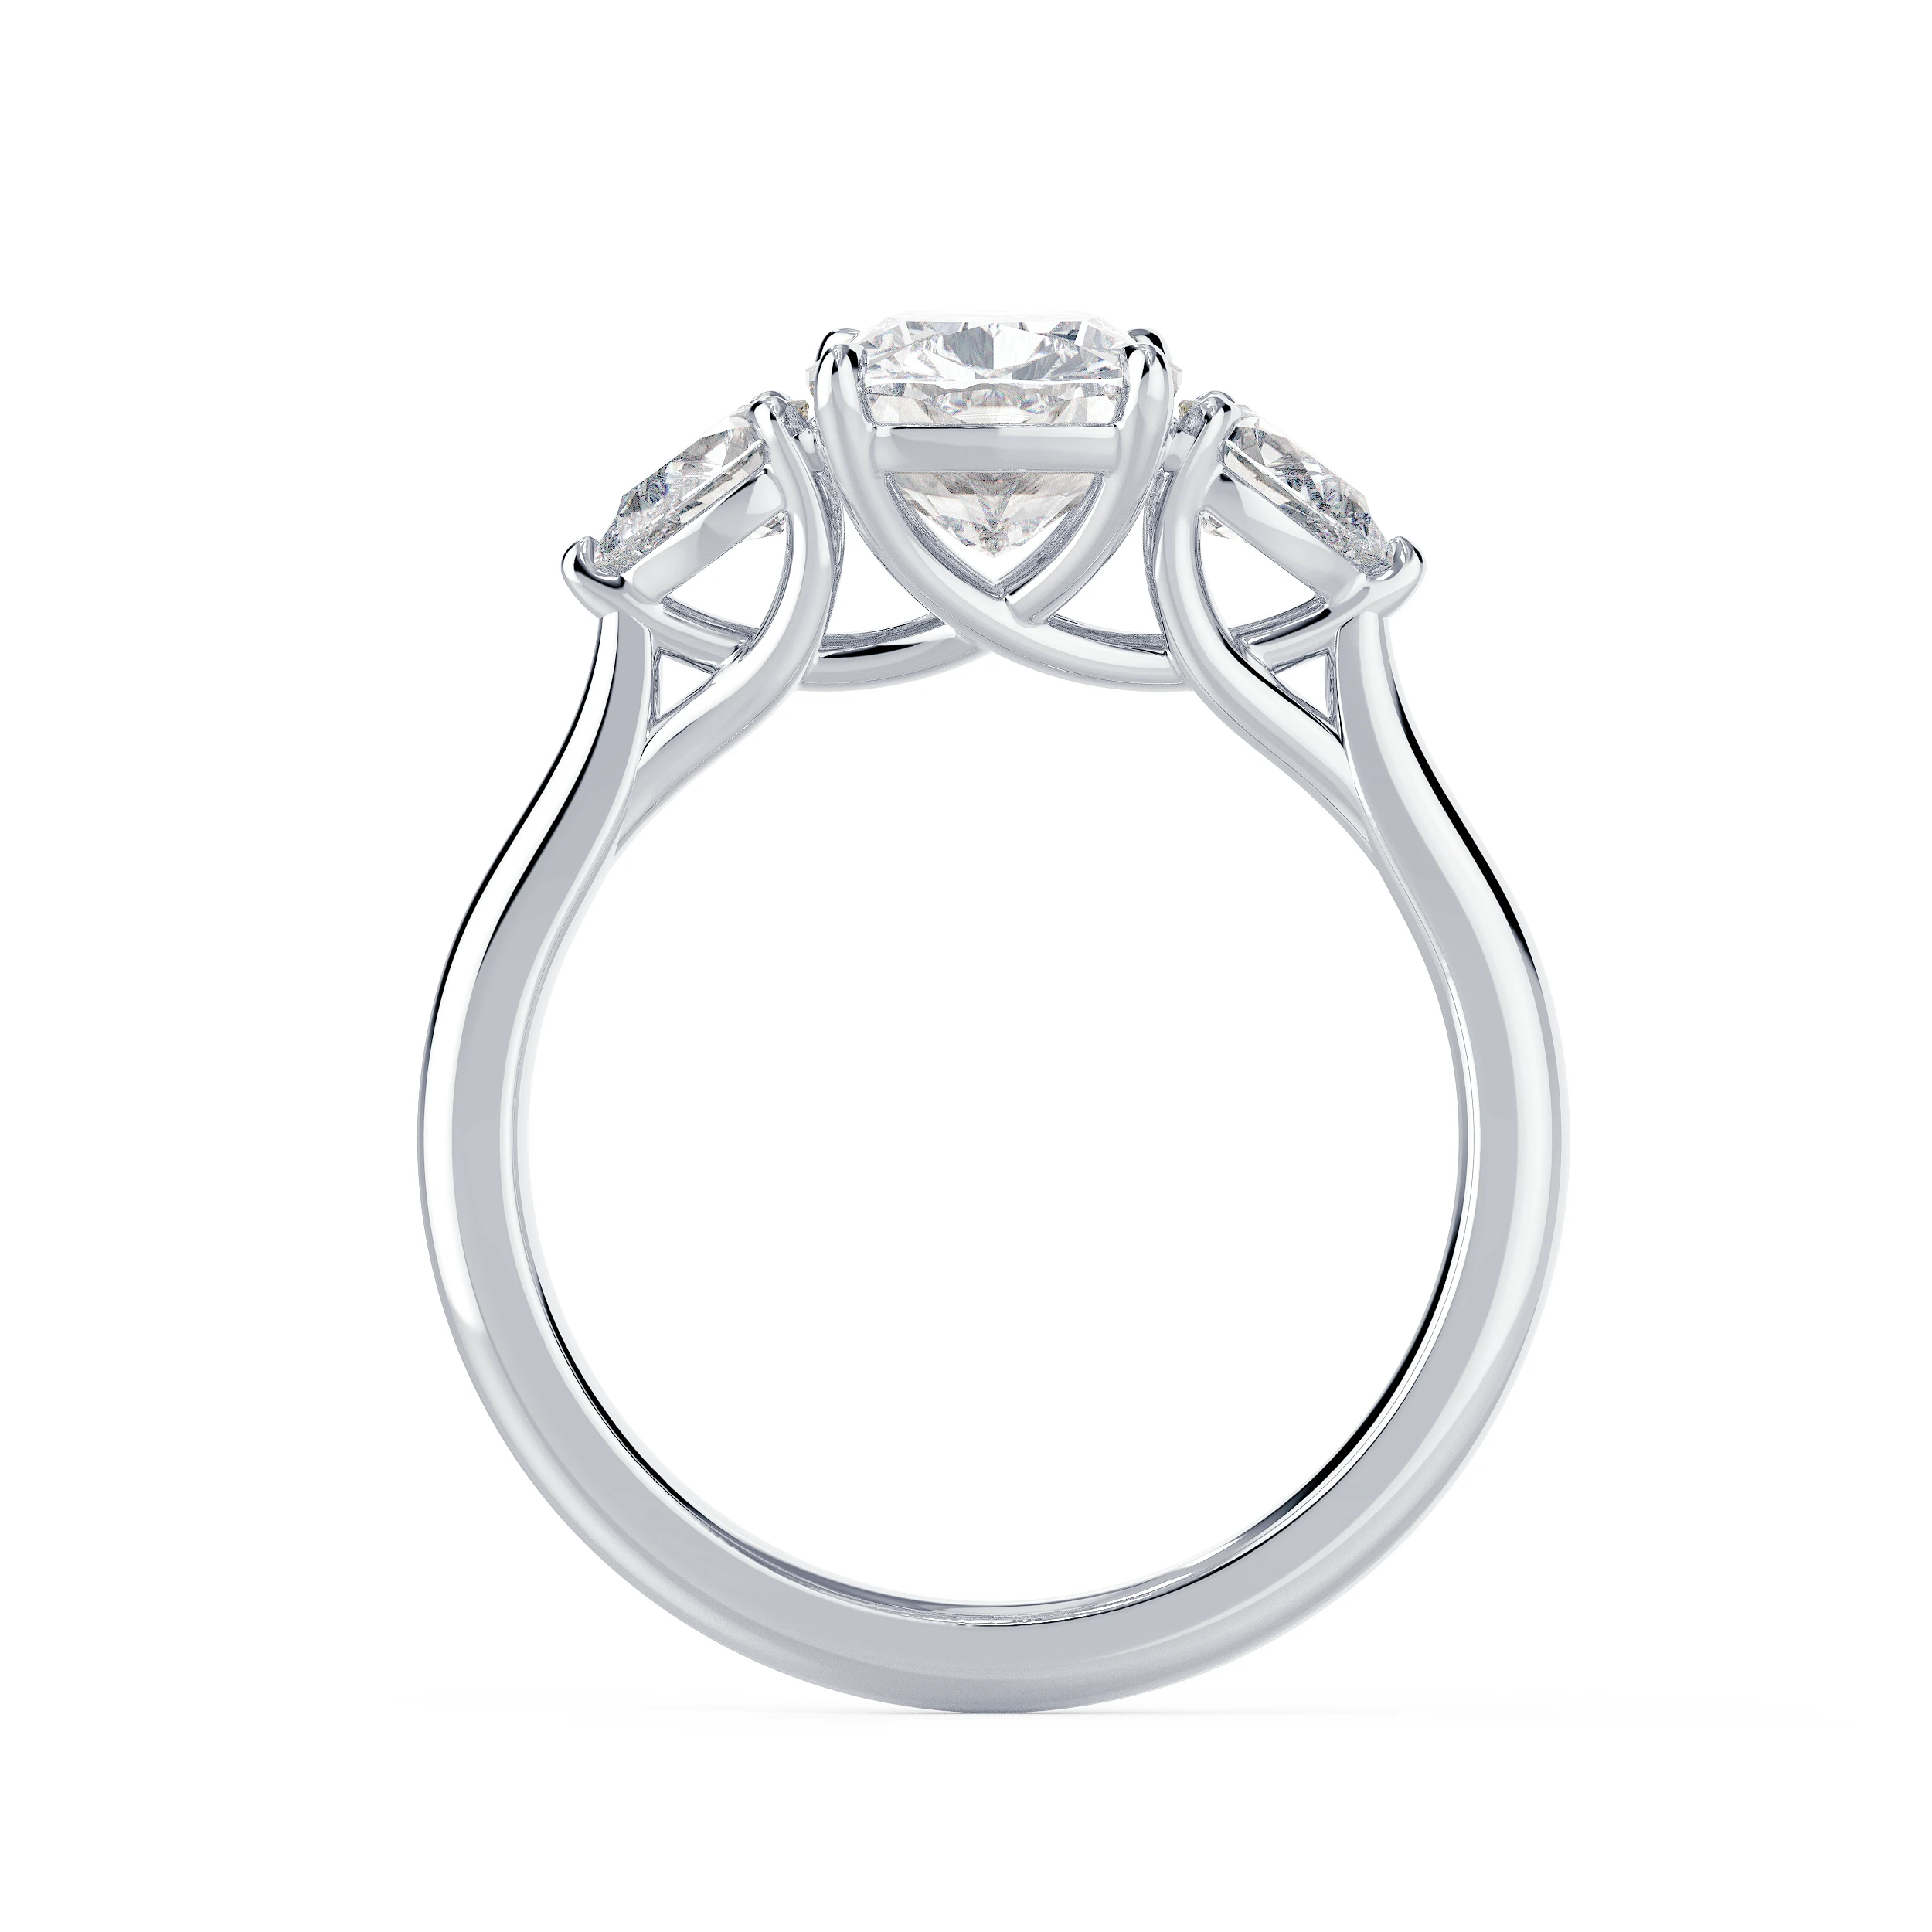 Hand Selected Diamonds Cushion and Pear Setting in White Gold (Profile View)